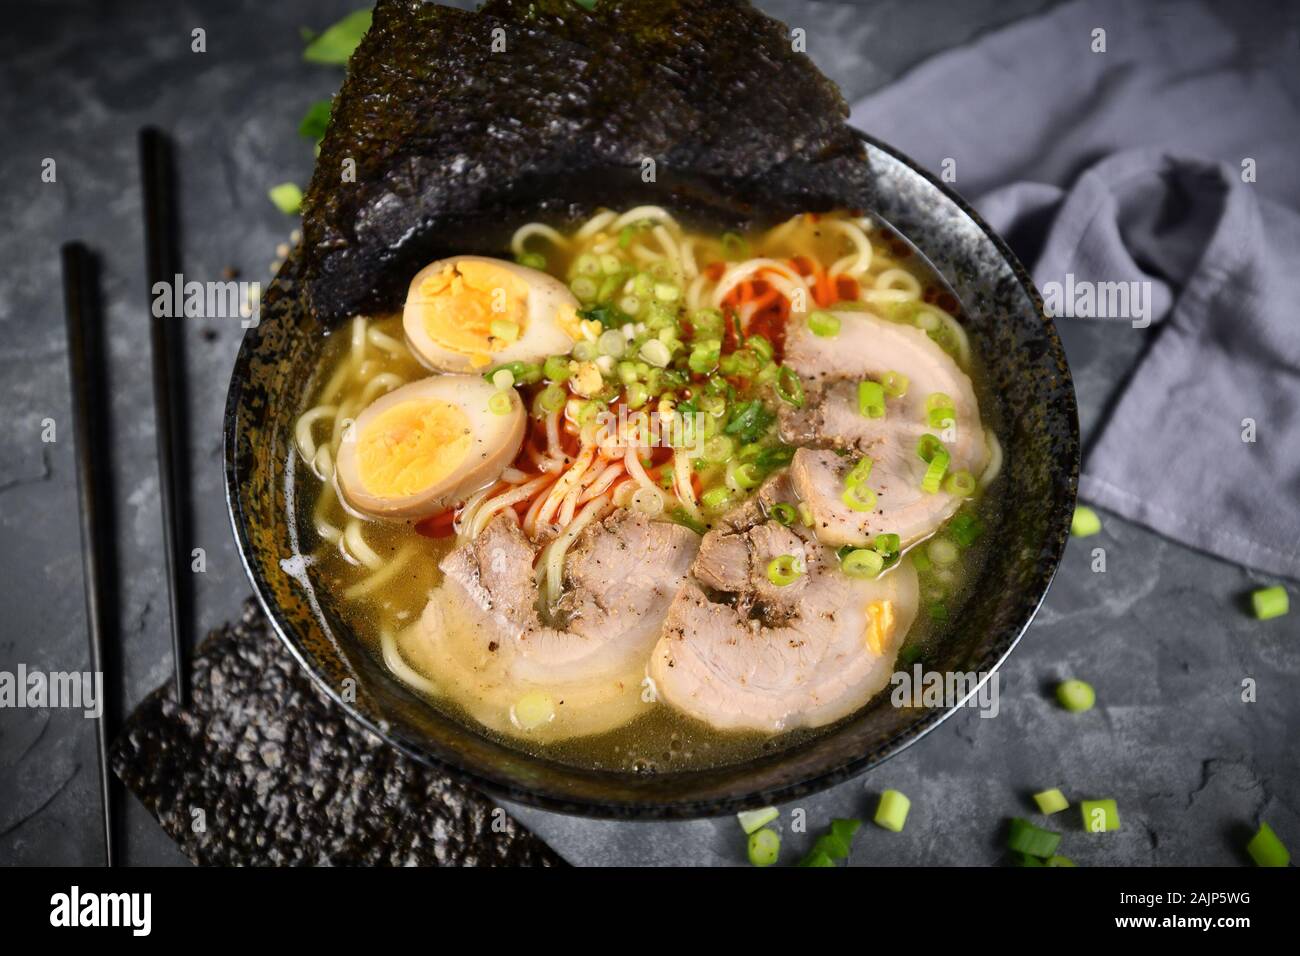 Homemade traditiona Japanese Ramen noudle soup with meat slices, egg and spring onions in dark bowl Stock Photo